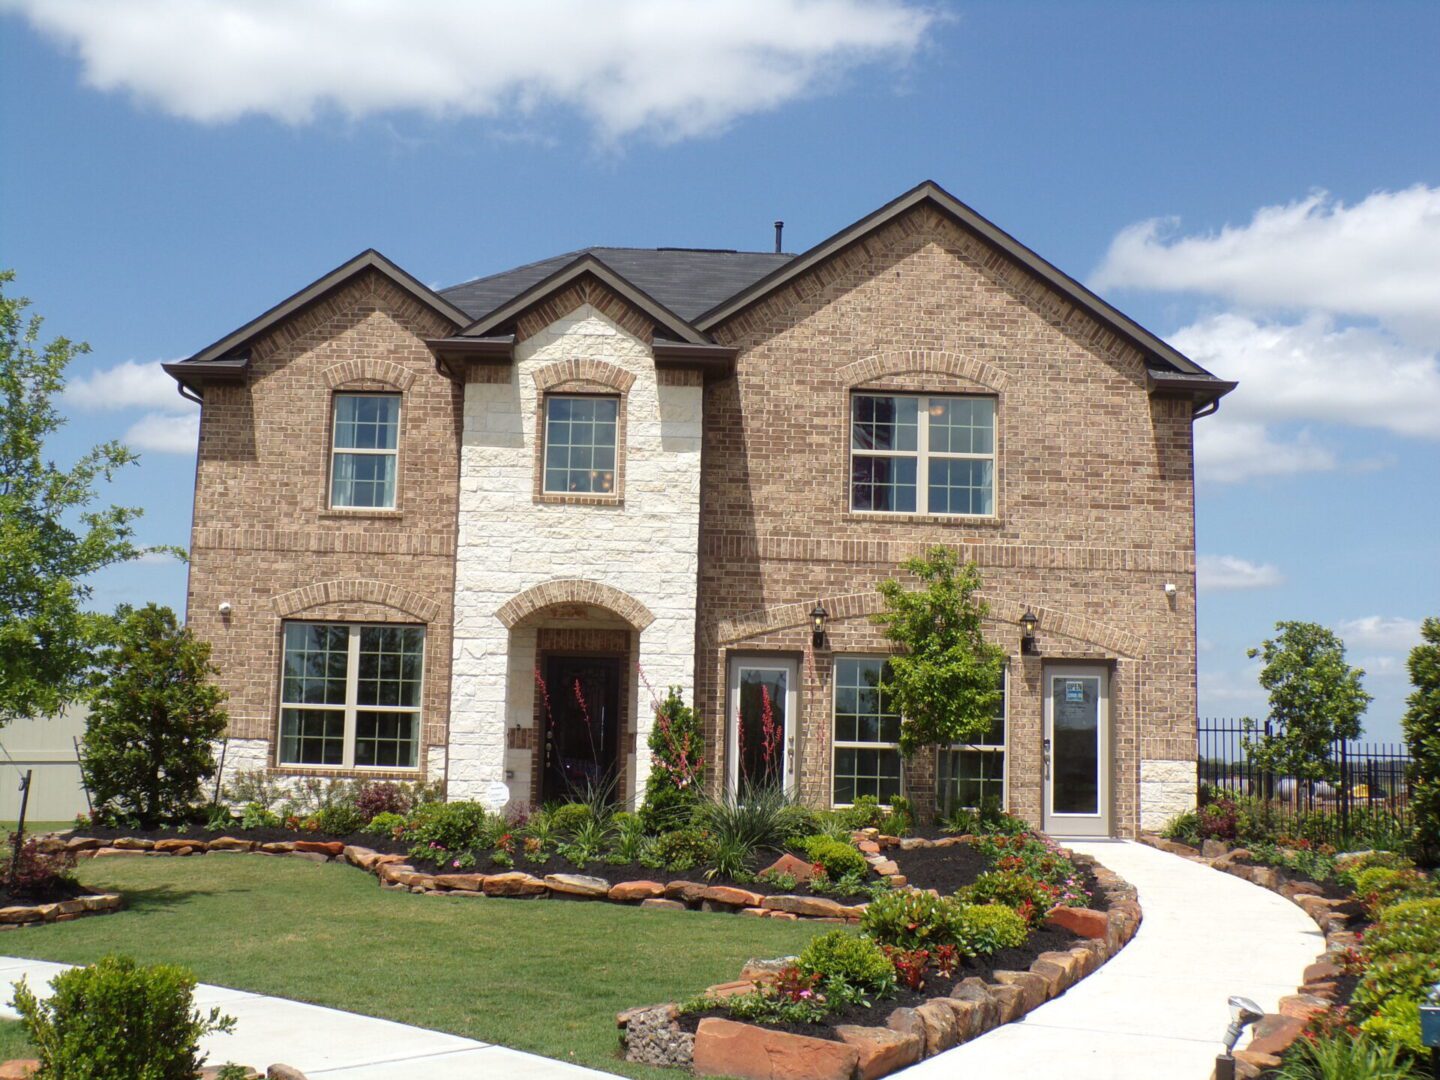 A large brick house built by Texas builders, with a lawn in front of it.